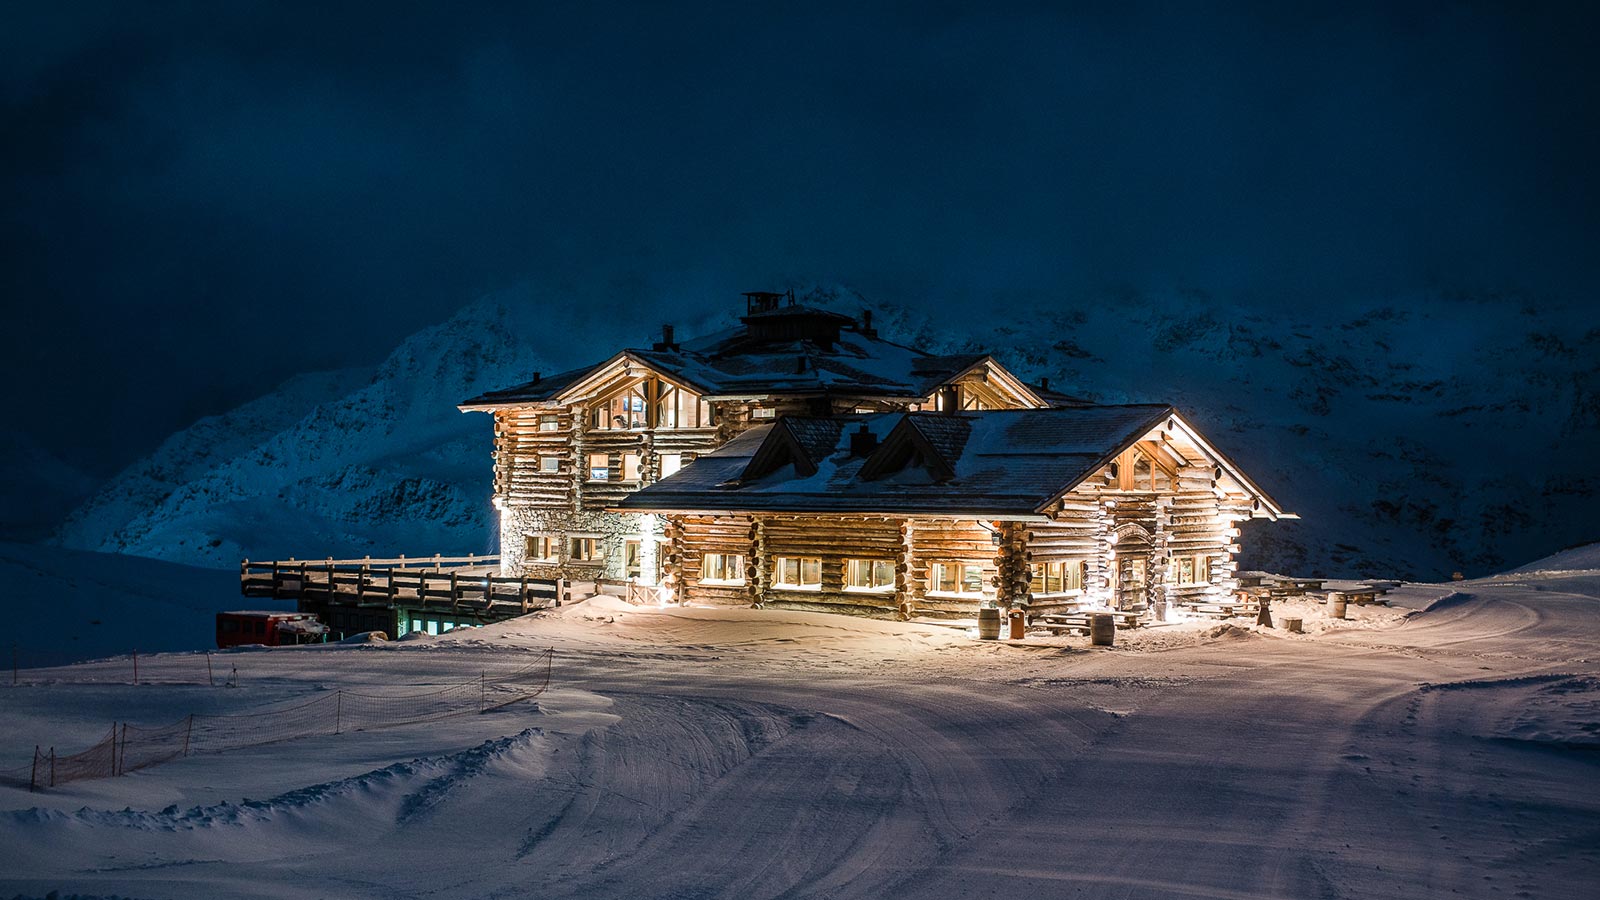 The mountain lodge at night shines with lights